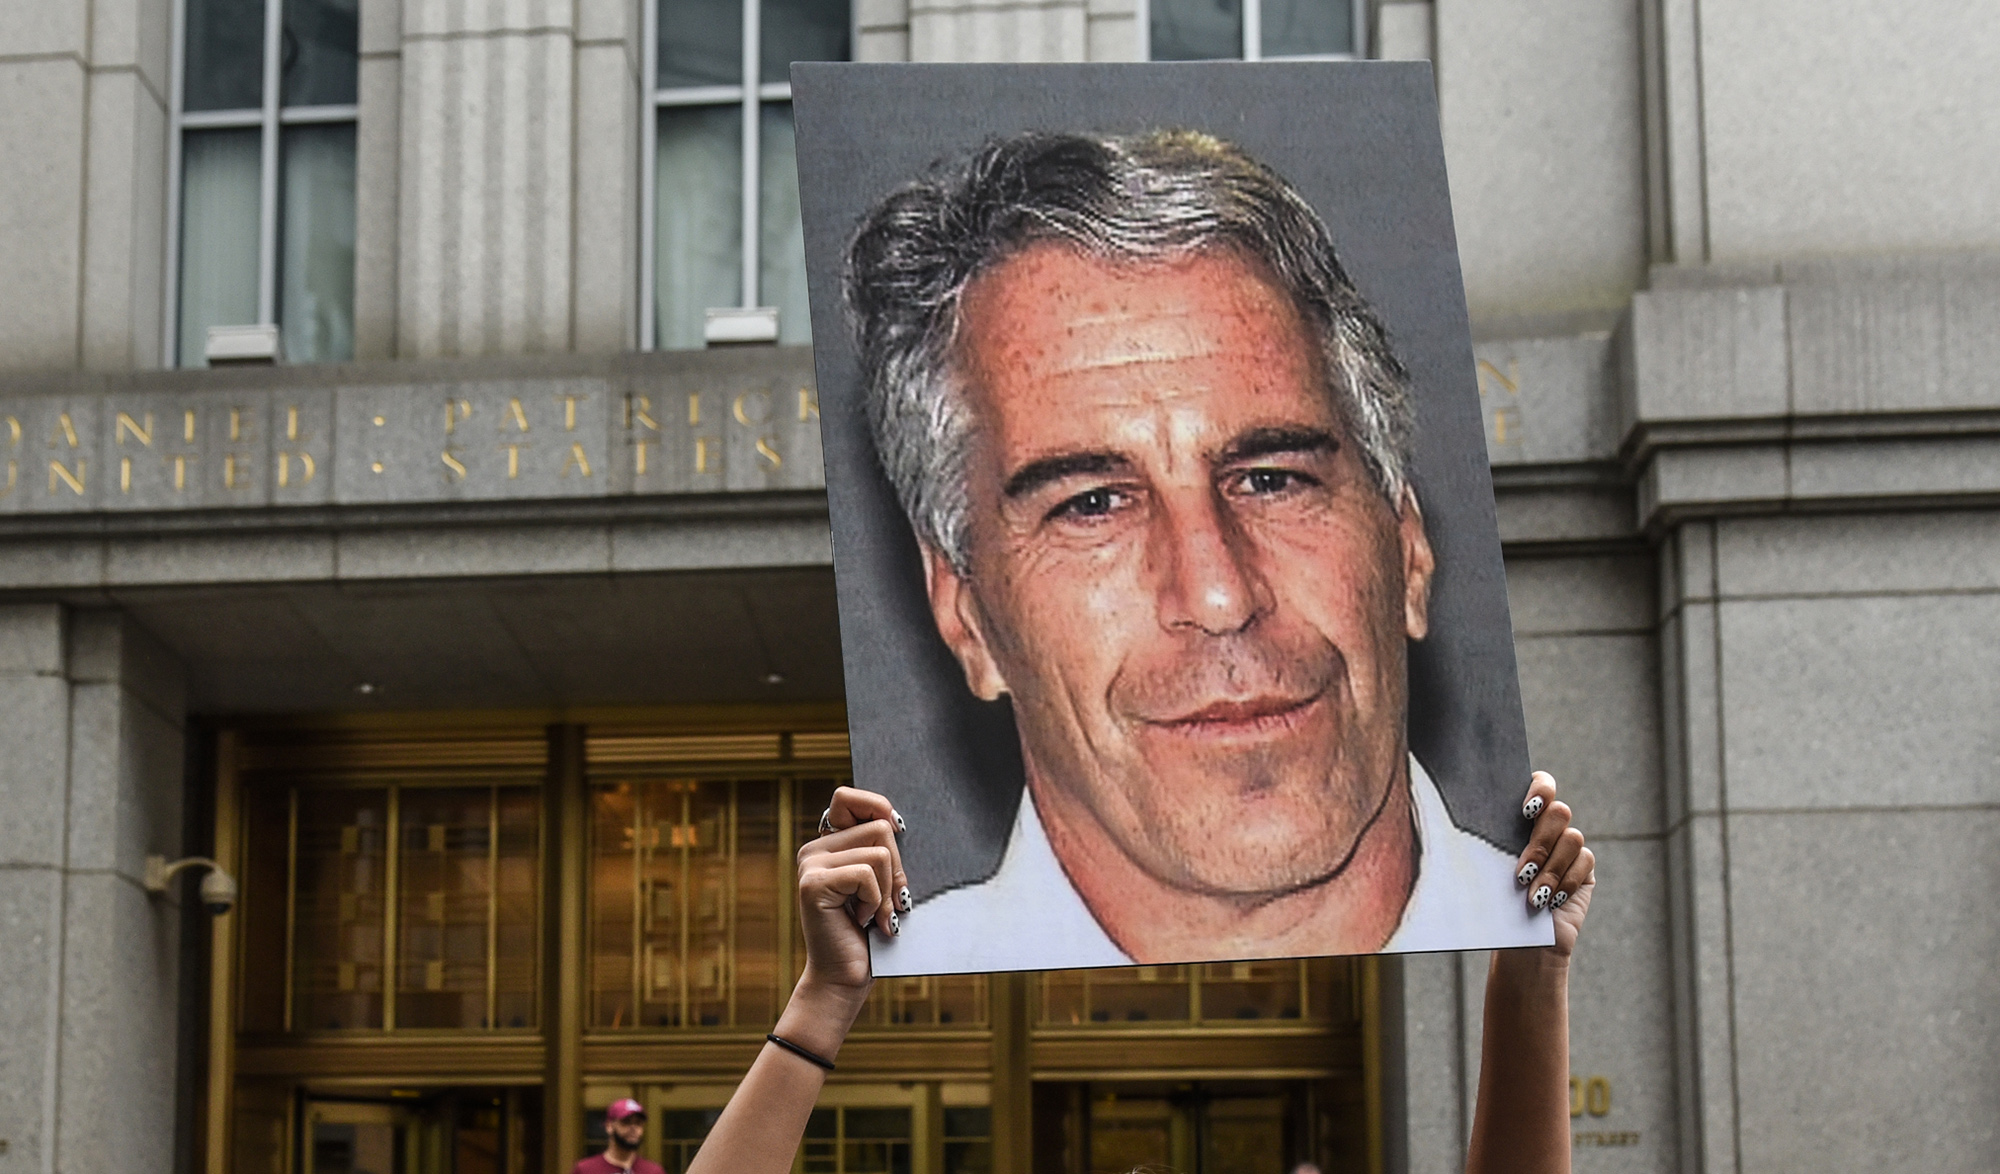 A protester holds up a sign of Jeffrey Epstein in front of the federal courthouse in New York in&nbsp;2019.